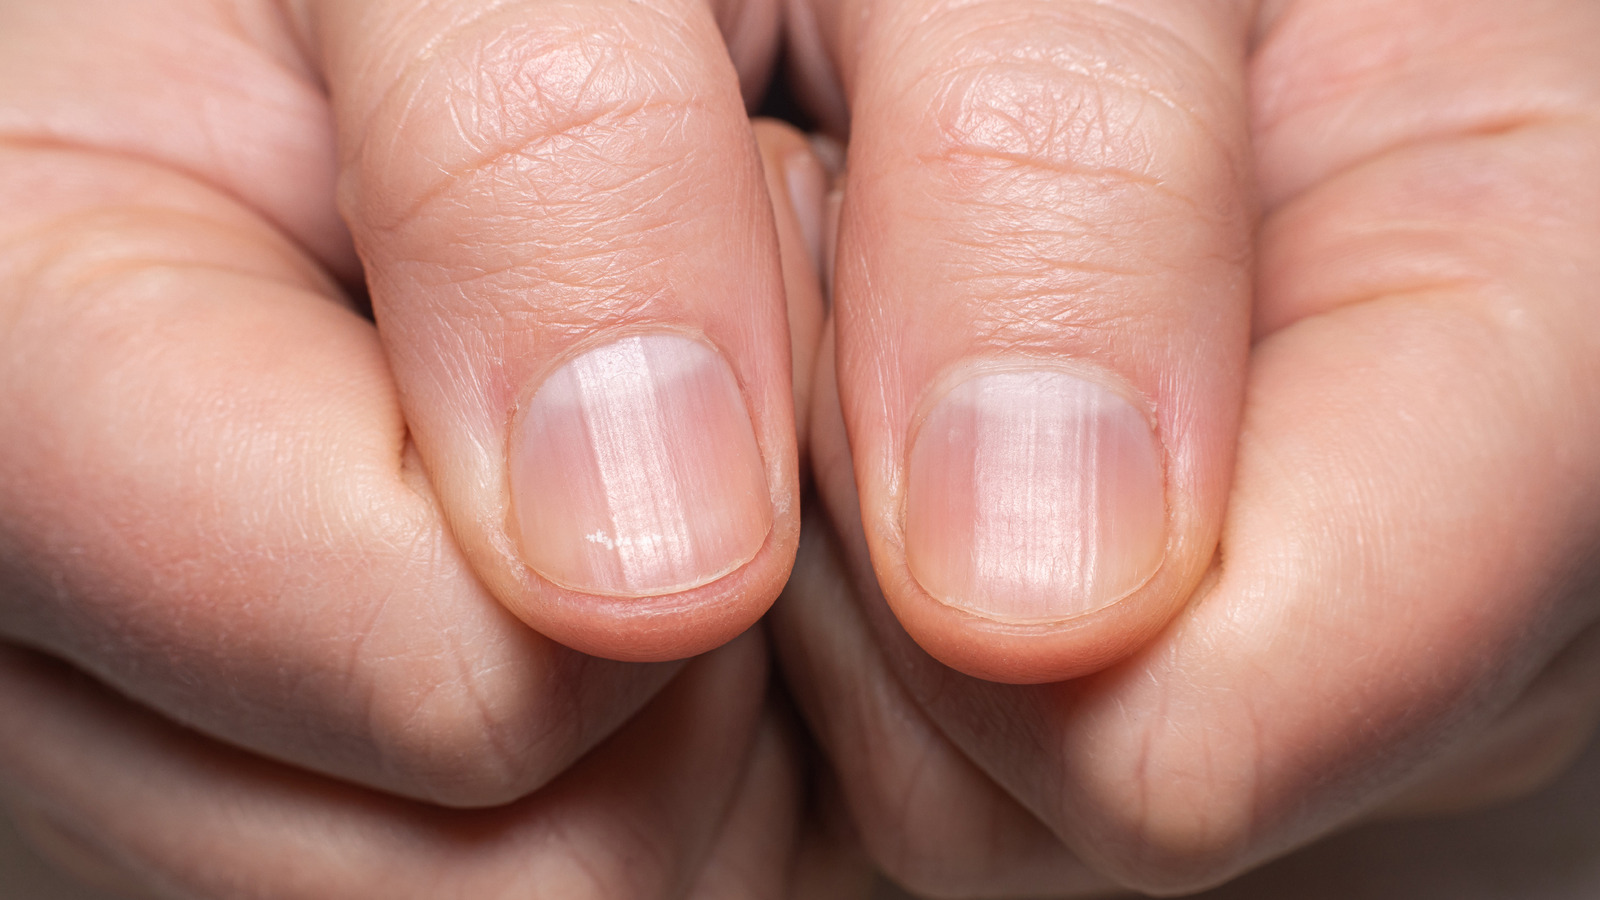 Can Vitamin Deficiency Cause Onycholysis? Understanding The Relationship